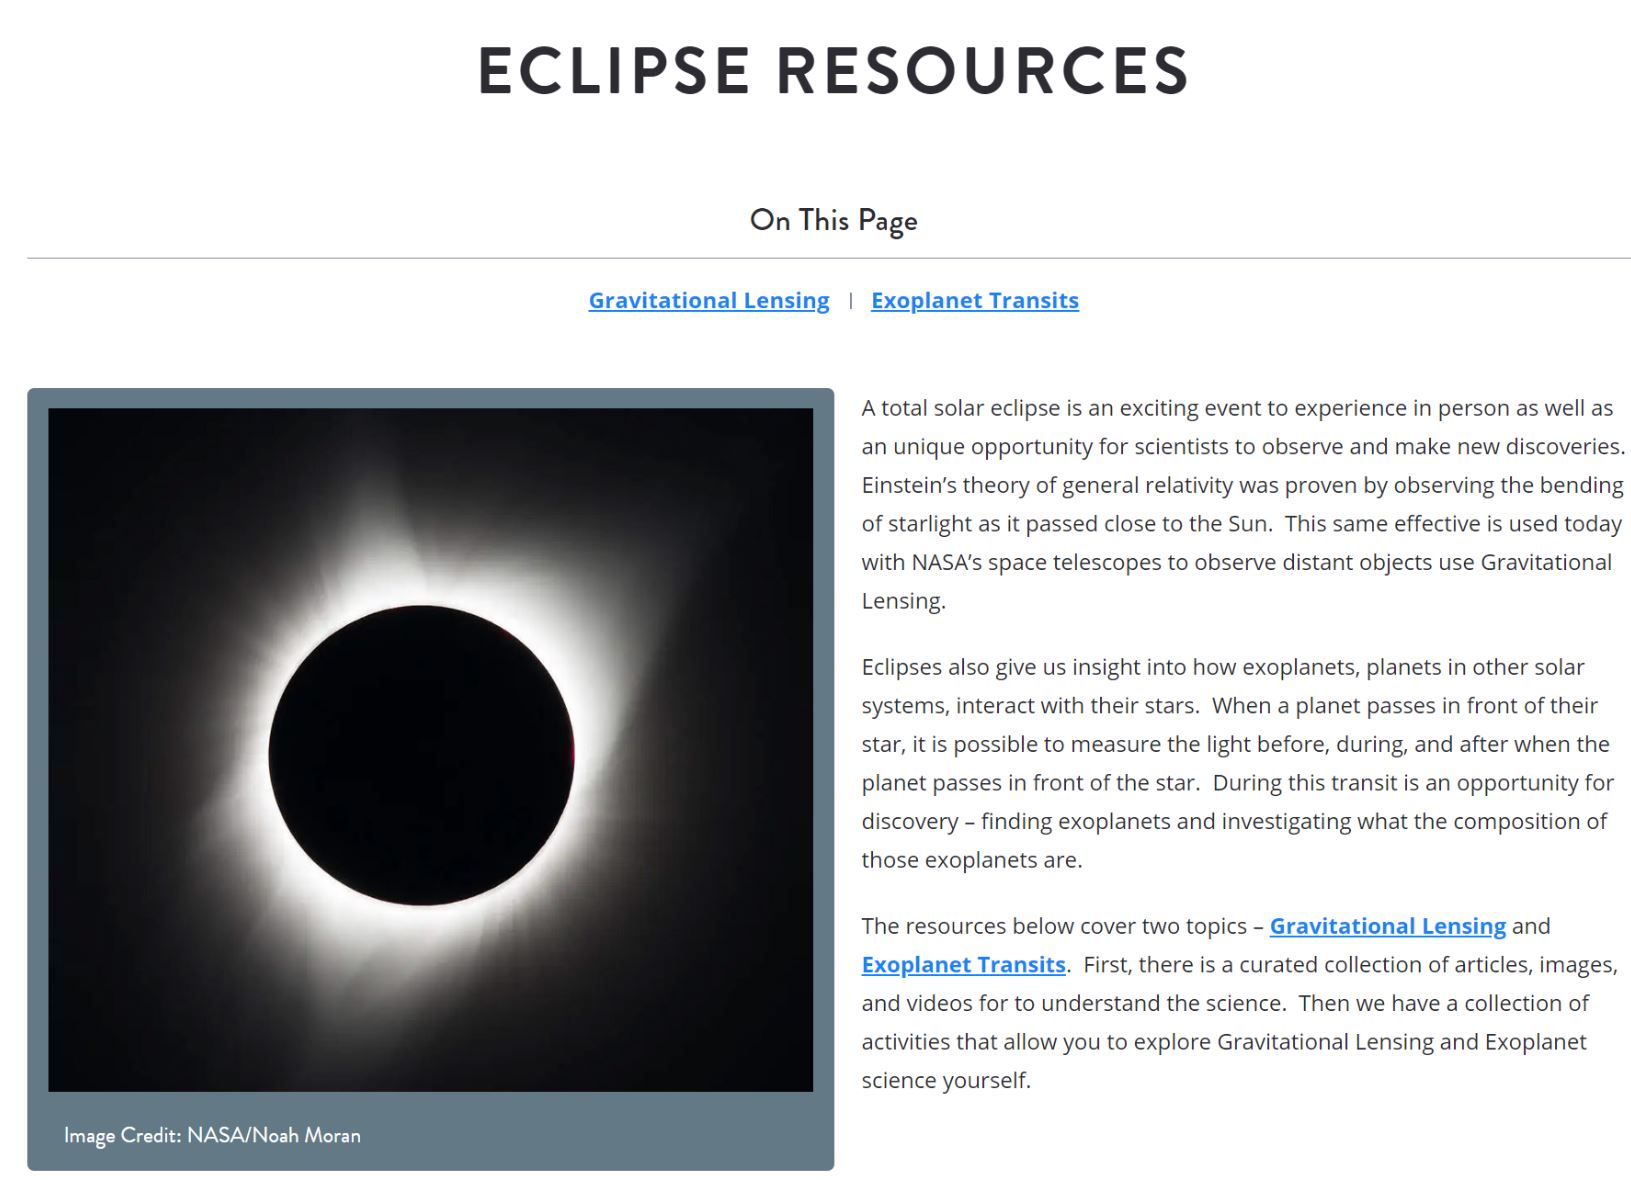 Screenshot of NASA's Universe of Learning Eclipse Resources webpage with text sharing 